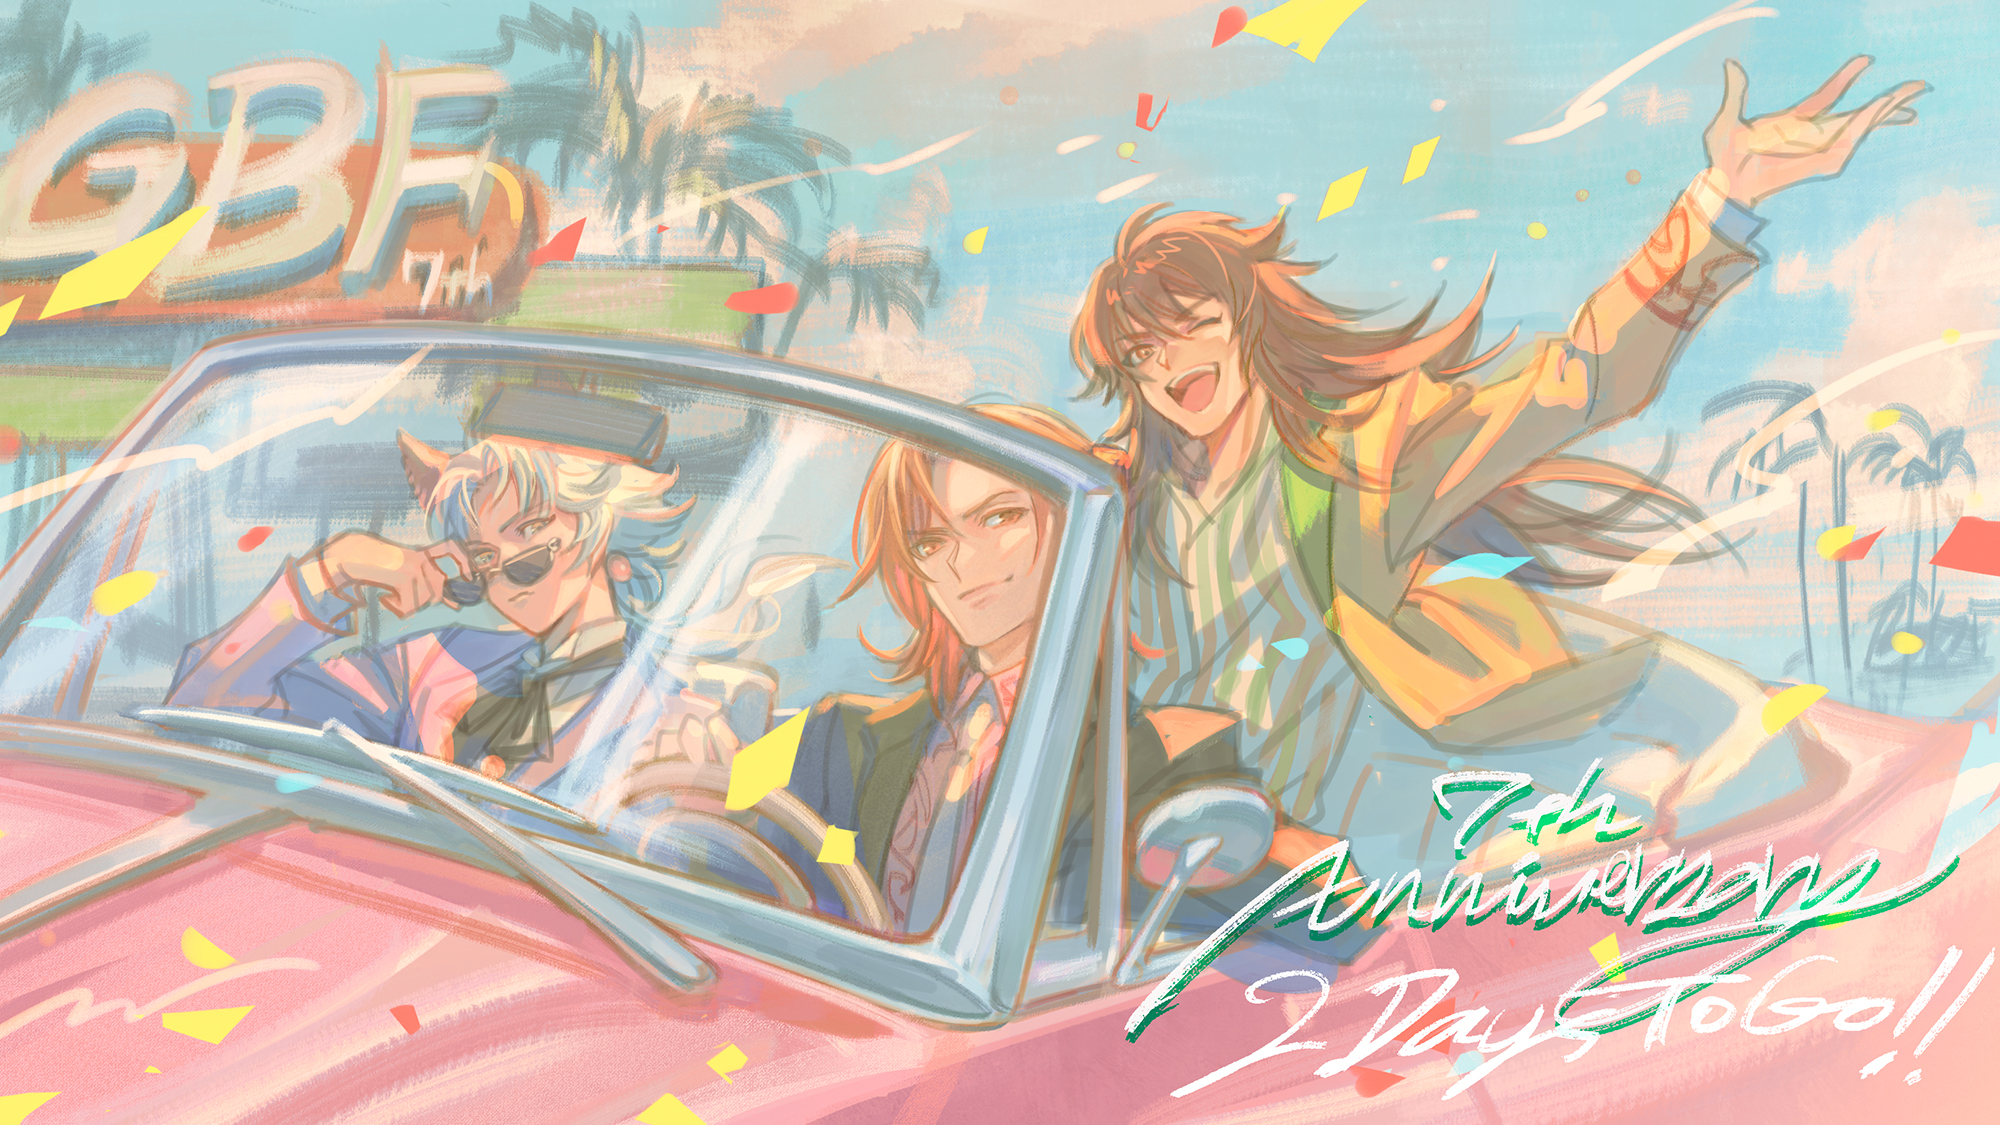 Granblue En Unofficial Two Days Until The 7th Anniversary And Today S Illustration Features Seruel Percival And Nezahualpilli In A Convertible On The Open Road Twitter